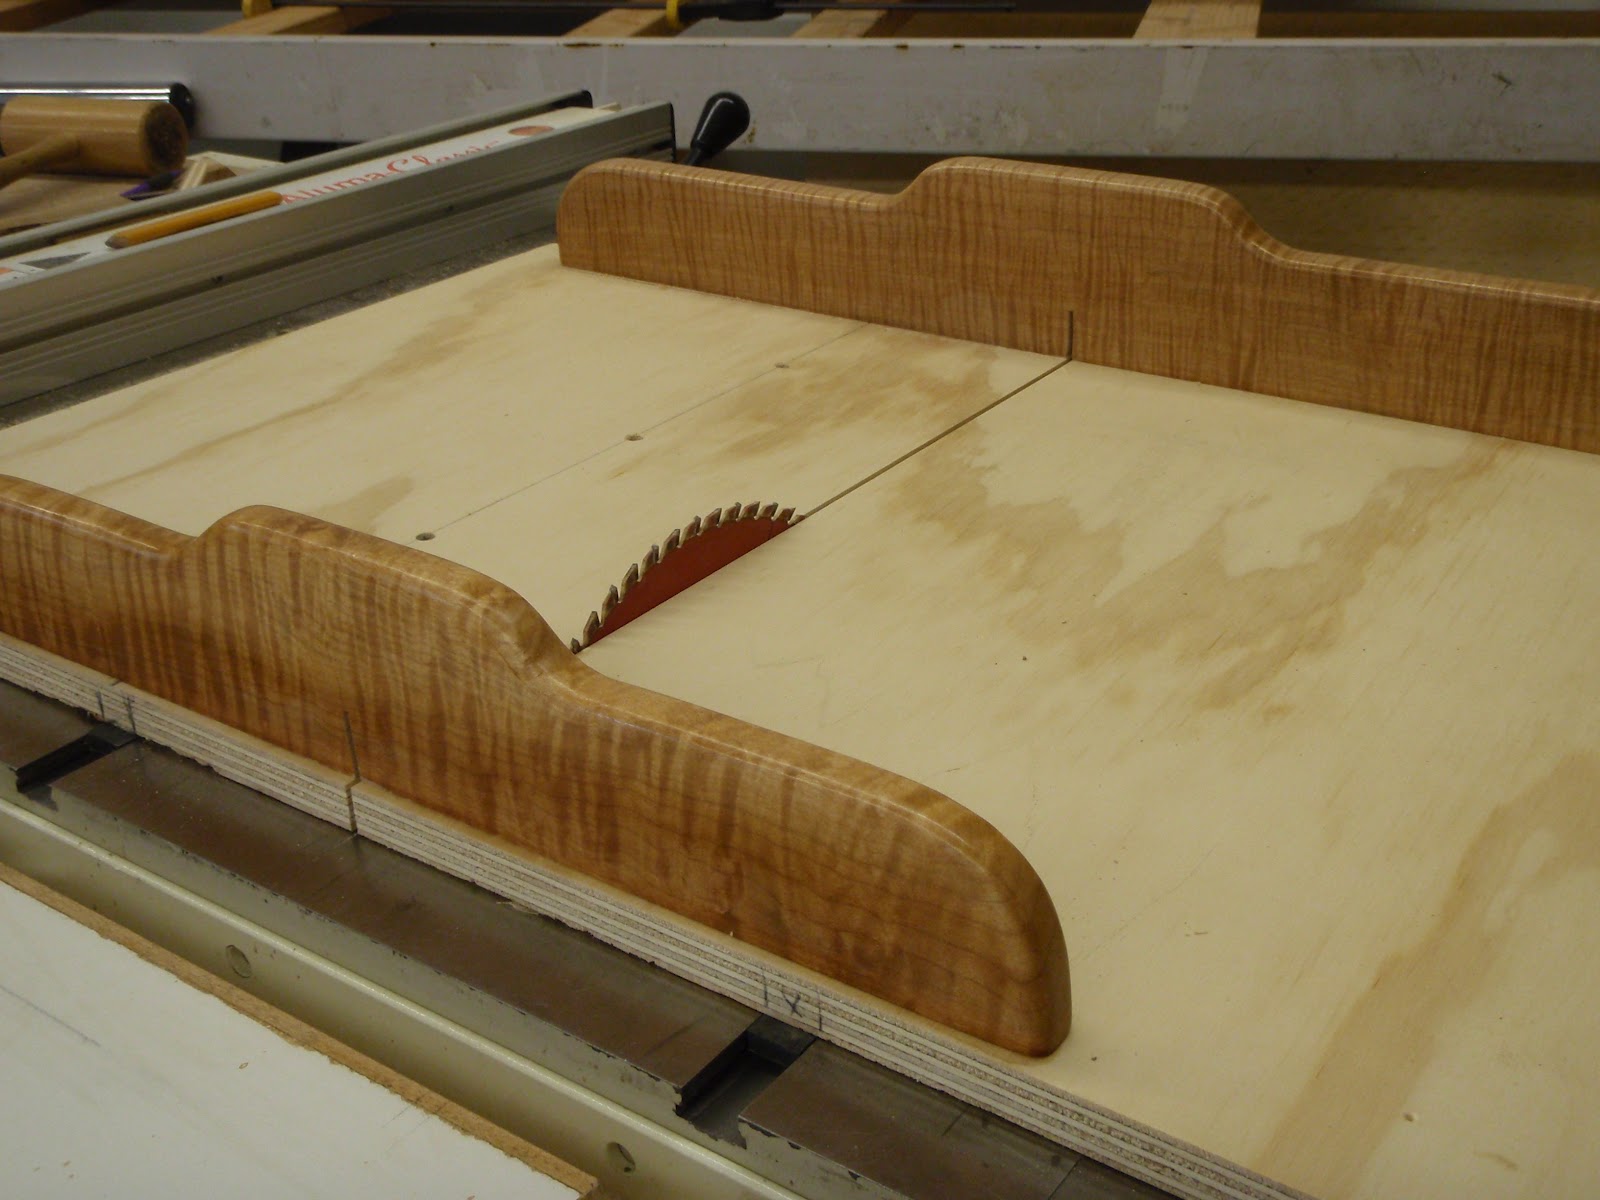  - Wood Working Photo Journal: Tiger Maple Table Saw Crosscut Sled